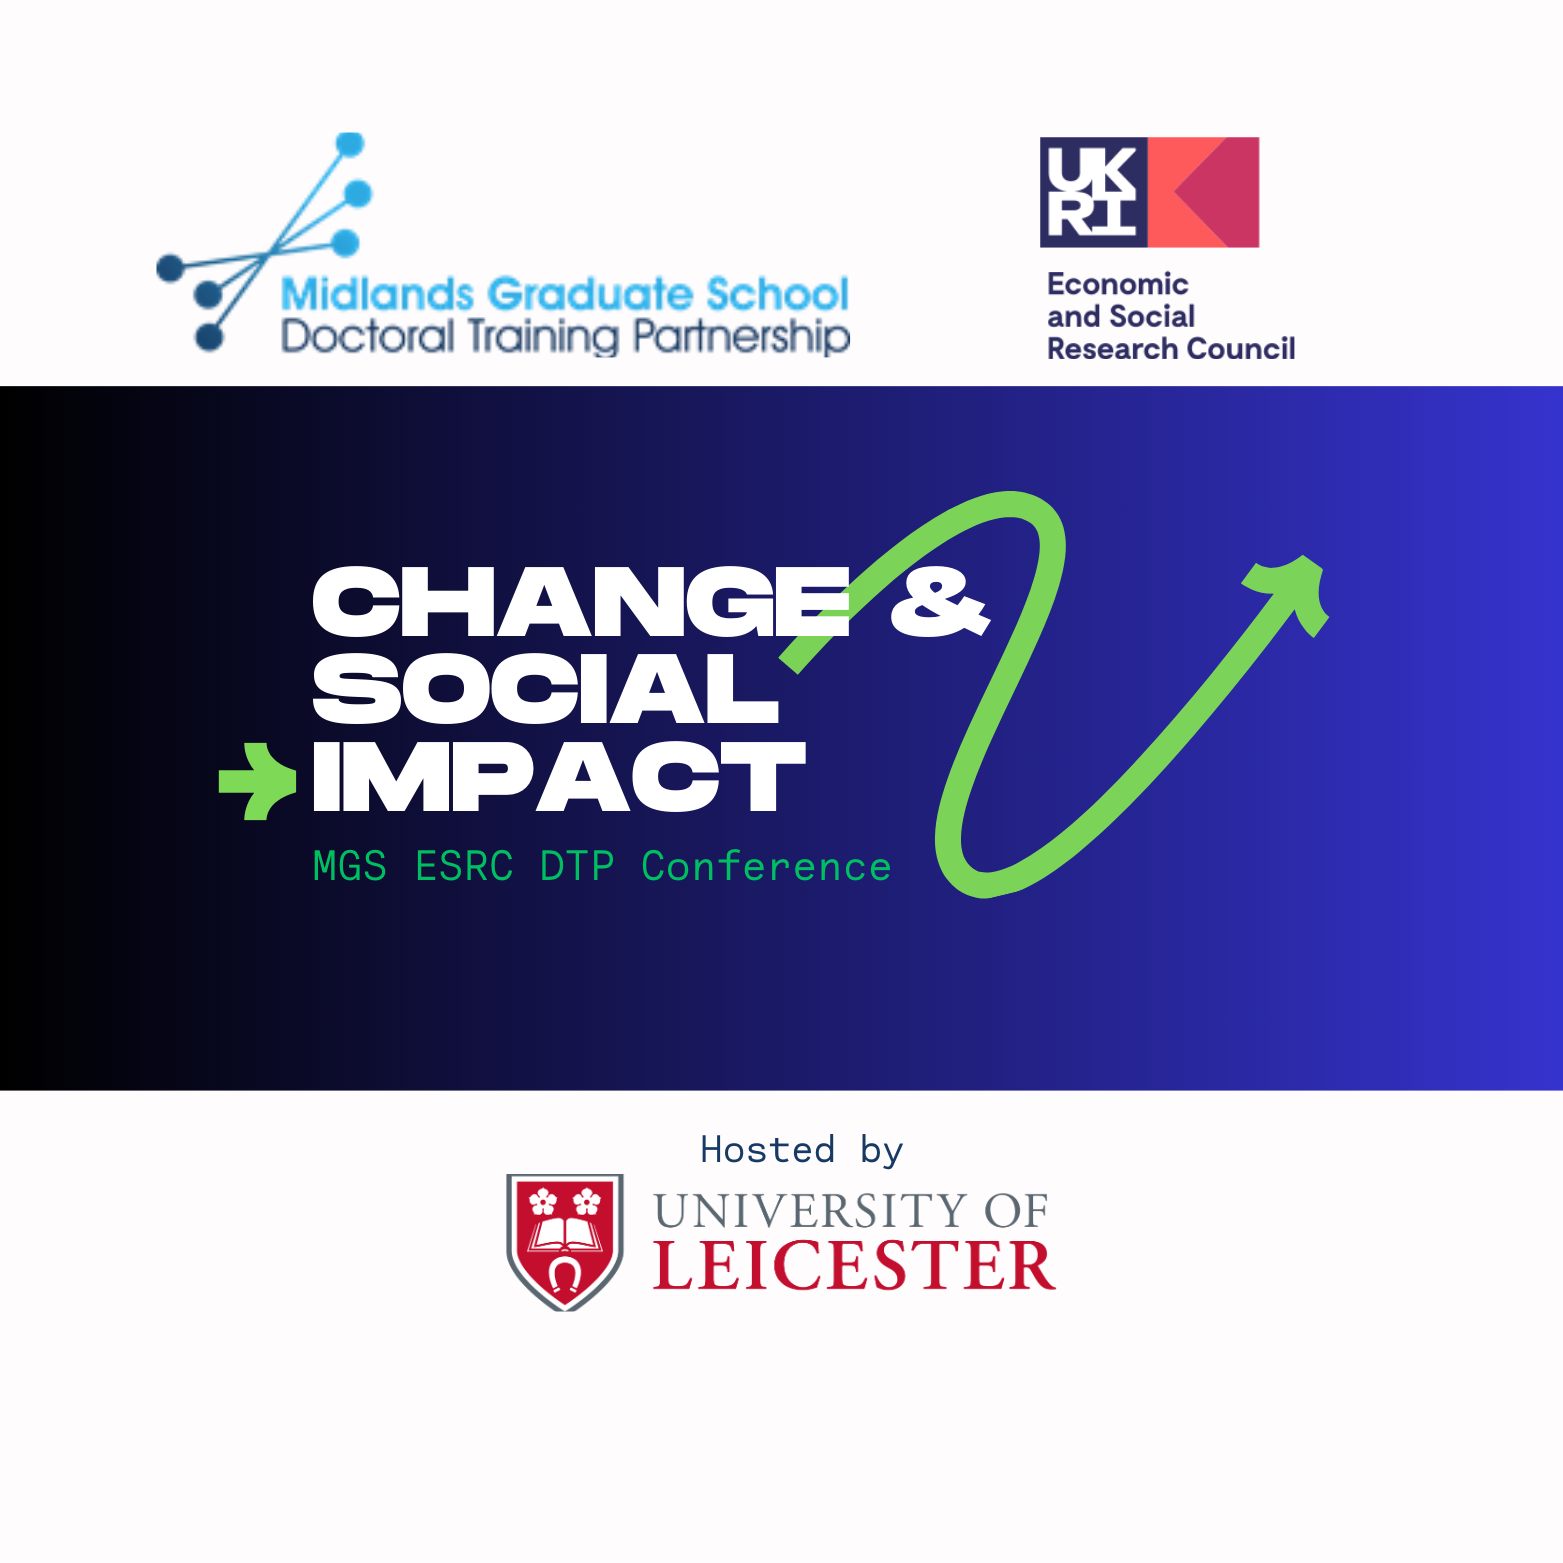 Research for Change and Social Impact logo in the middle, Midlands Graduate School Doctorial Training Partnership logo above to the left next to Economic and Social Research Council logo to the right. University of Leicester logo with 'hosted by' text at the bottom